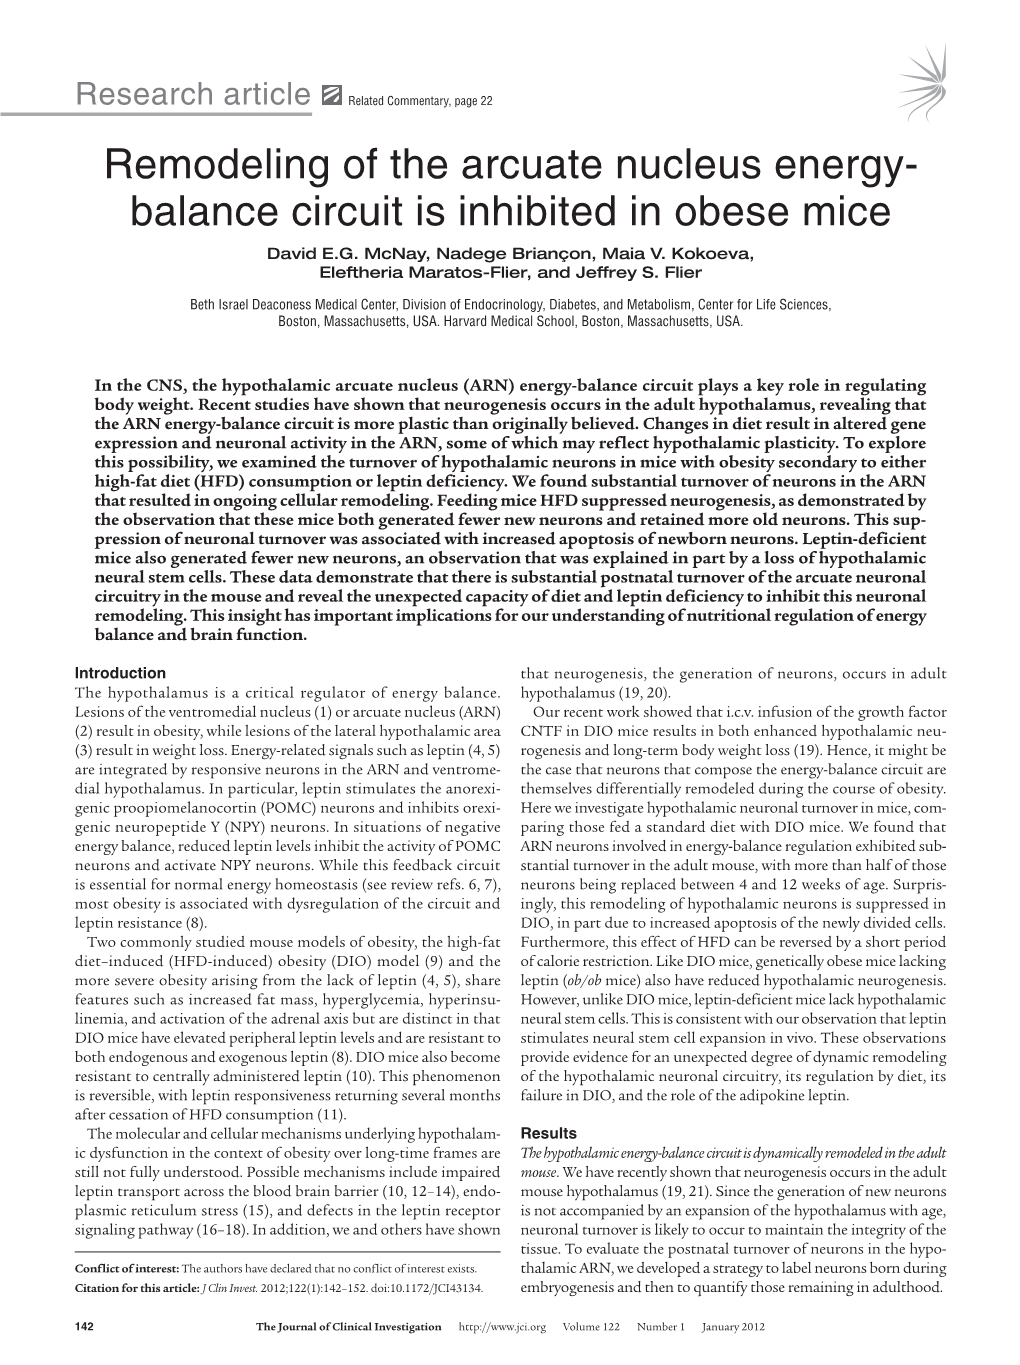 Balance Circuit Is Inhibited in Obese Mice David E.G